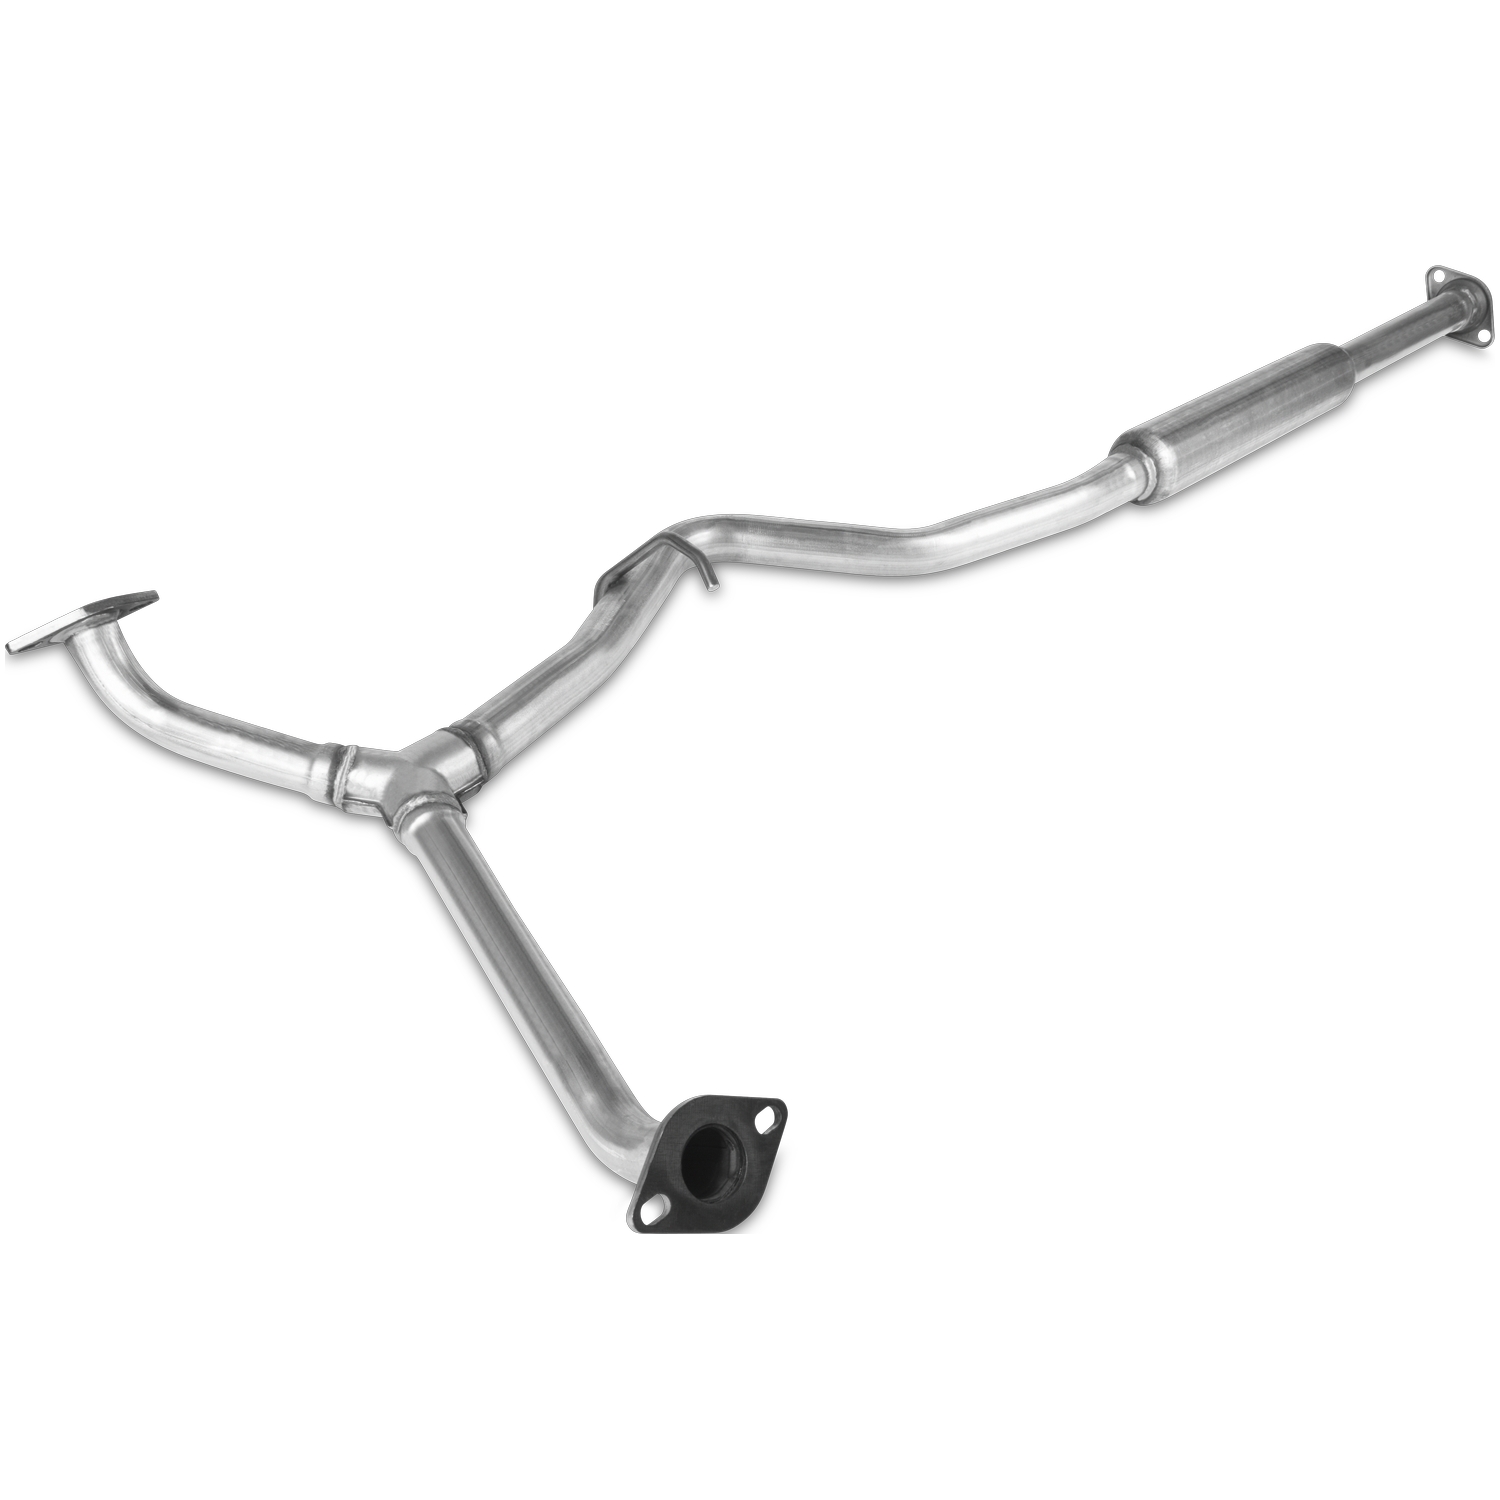 Direct-Fit Exhaust Resonator and Pipe Assembly, 2008-2013 Subaru Forester/Impreza 2.5L